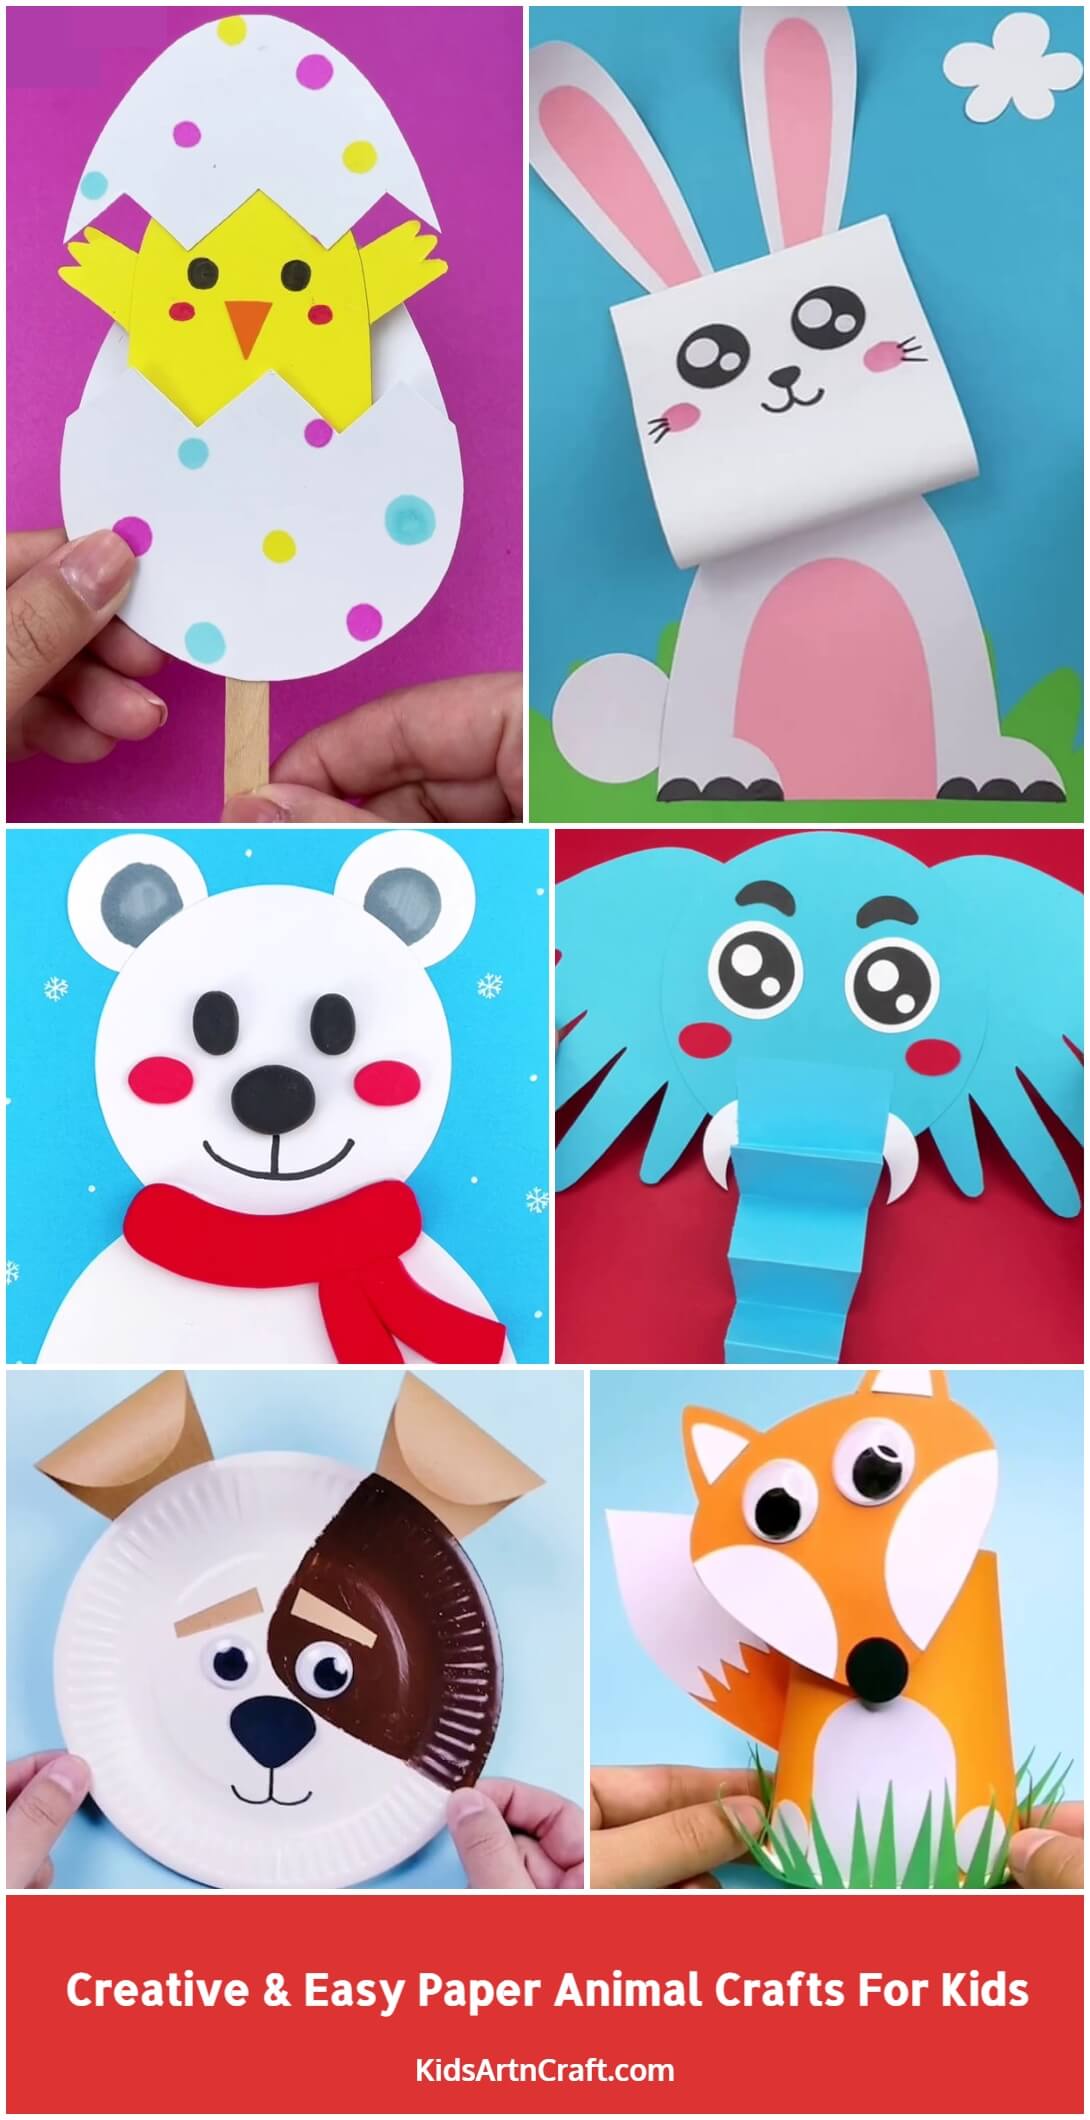 Creative & Easy Paper Animal Crafts For Kids